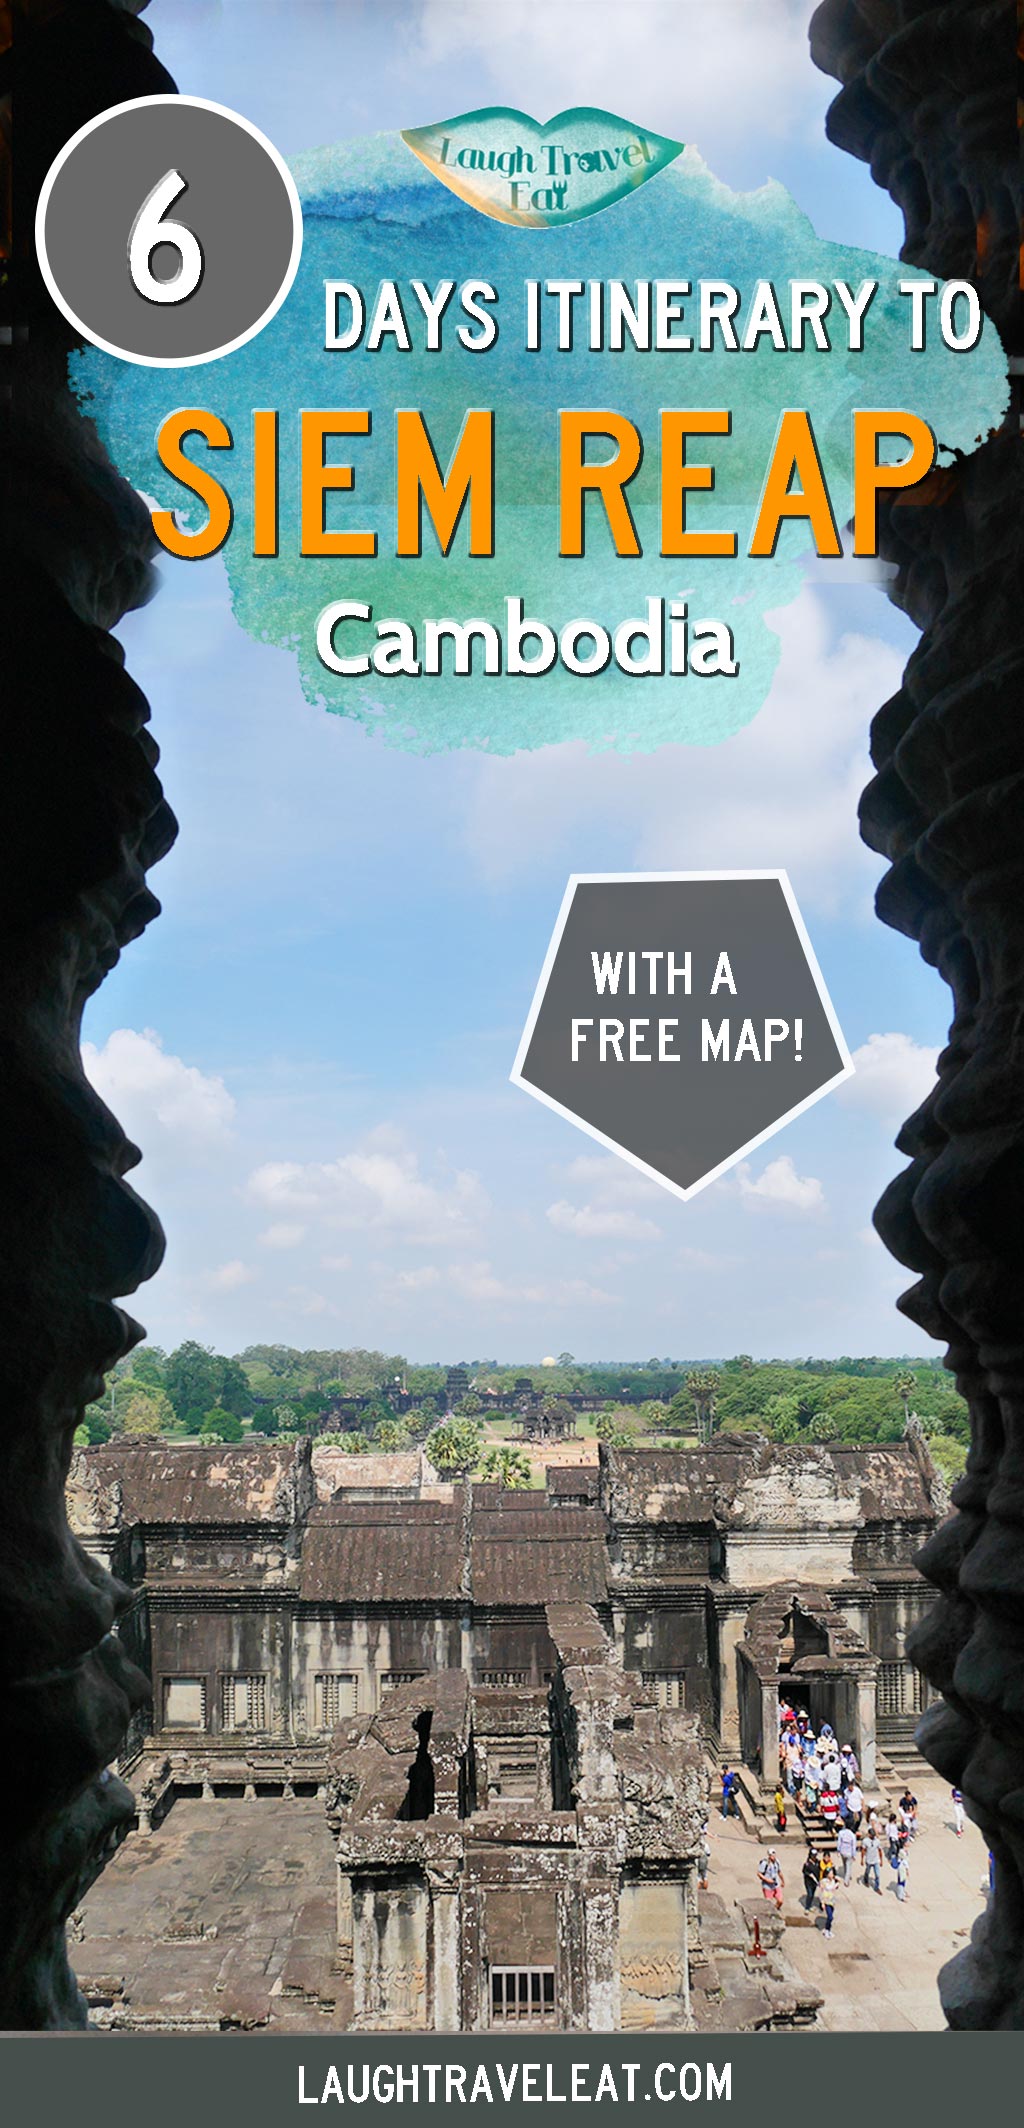 As a first time visitor to Siem Reap (and Cambodia), we spent 6 days exploring Angkor and Siem Reap and here's our tips and itinerary: